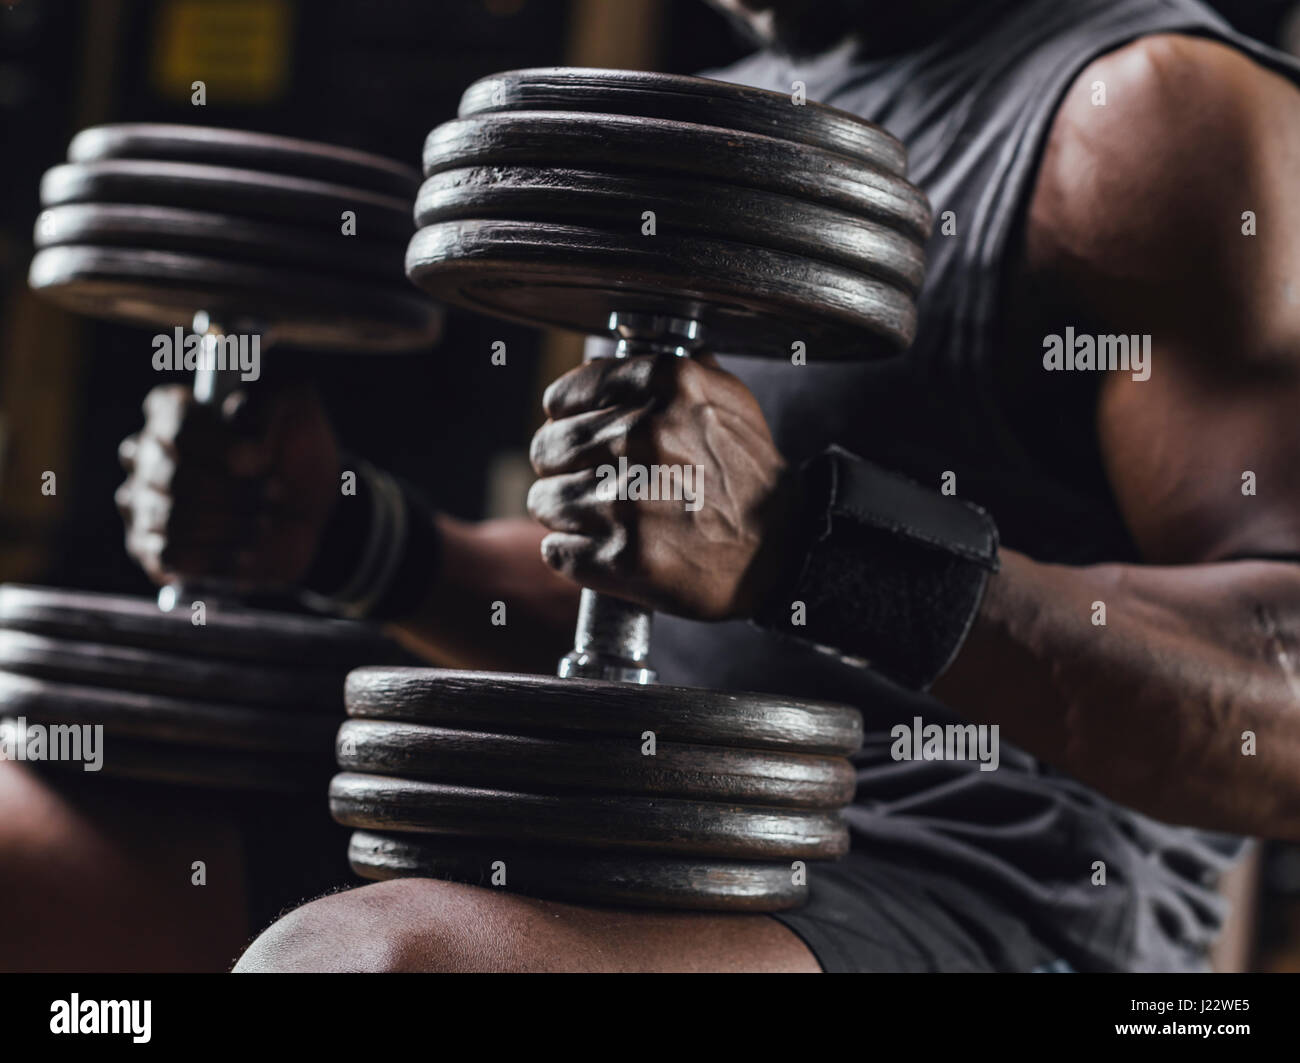 Athlete traing with dumbbells in gym, close up Stock Photo